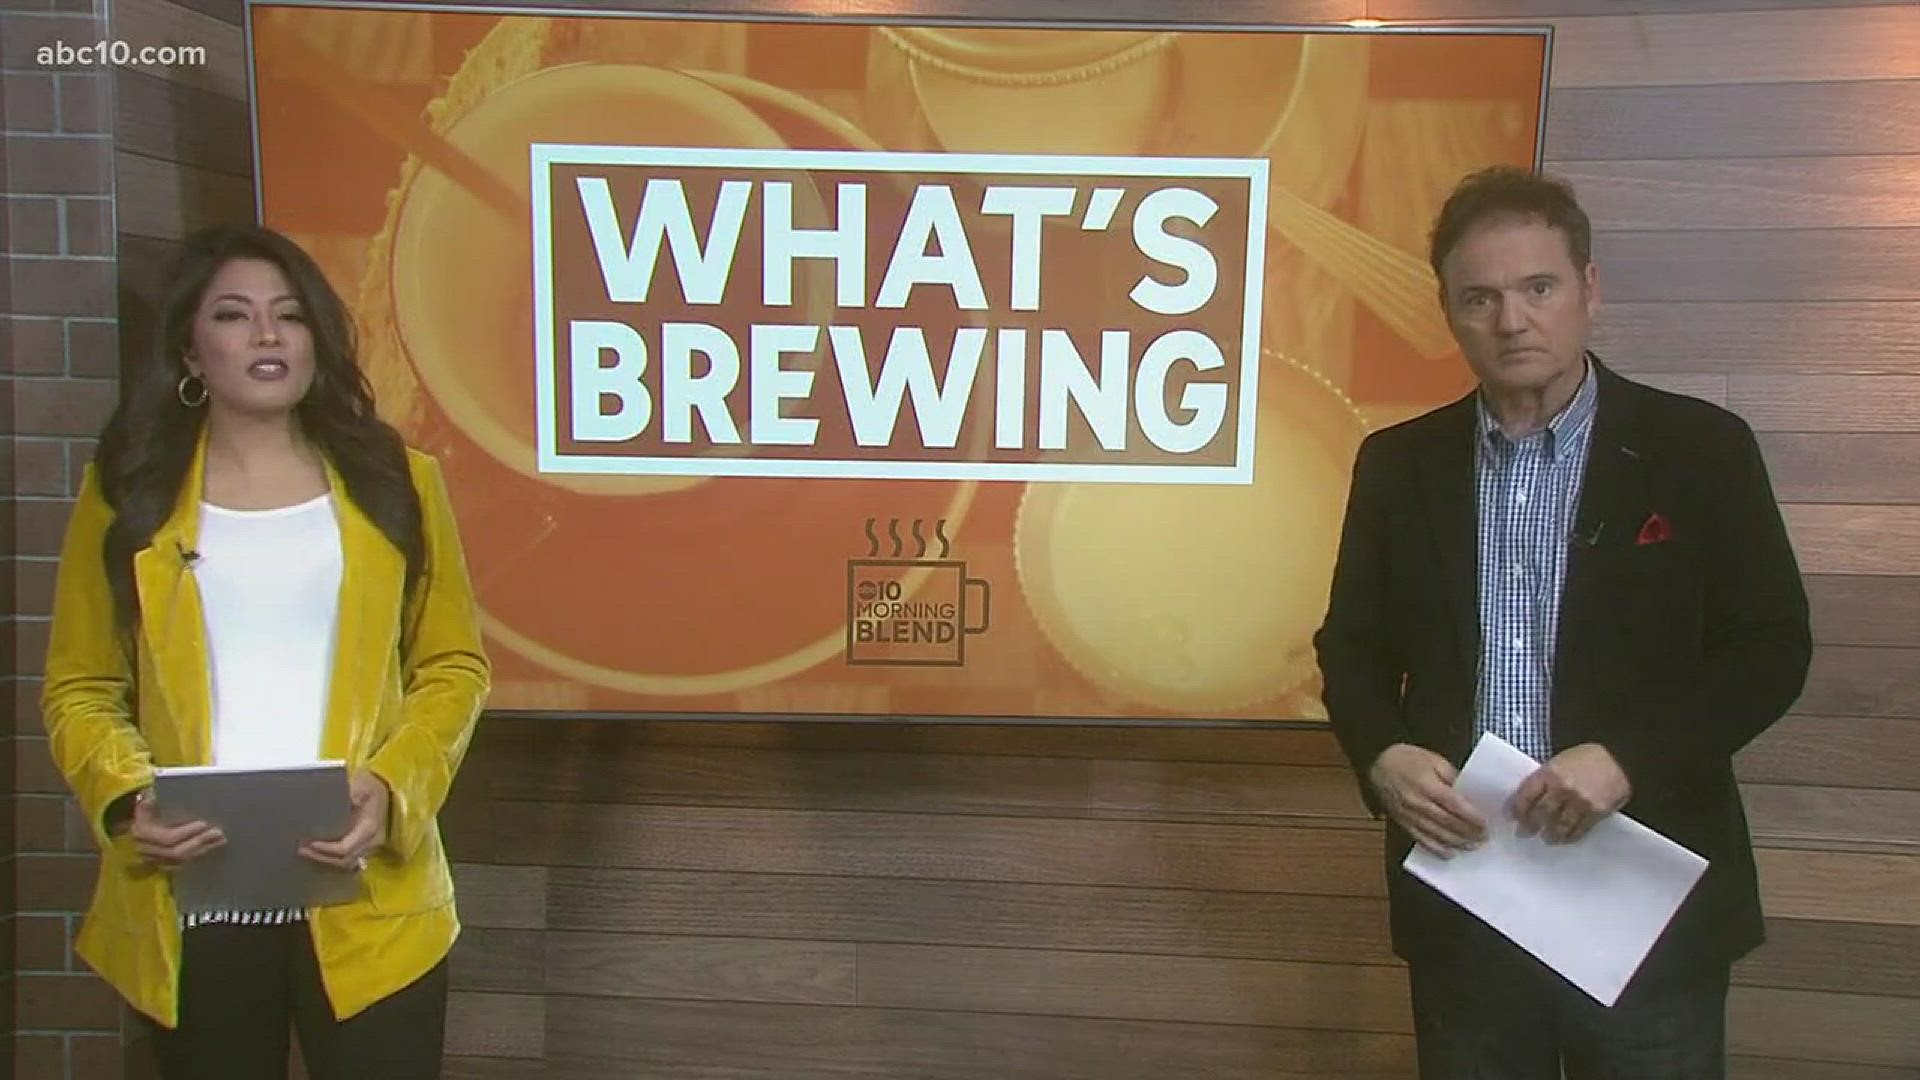 Megan and Walt have what's brewing locally.